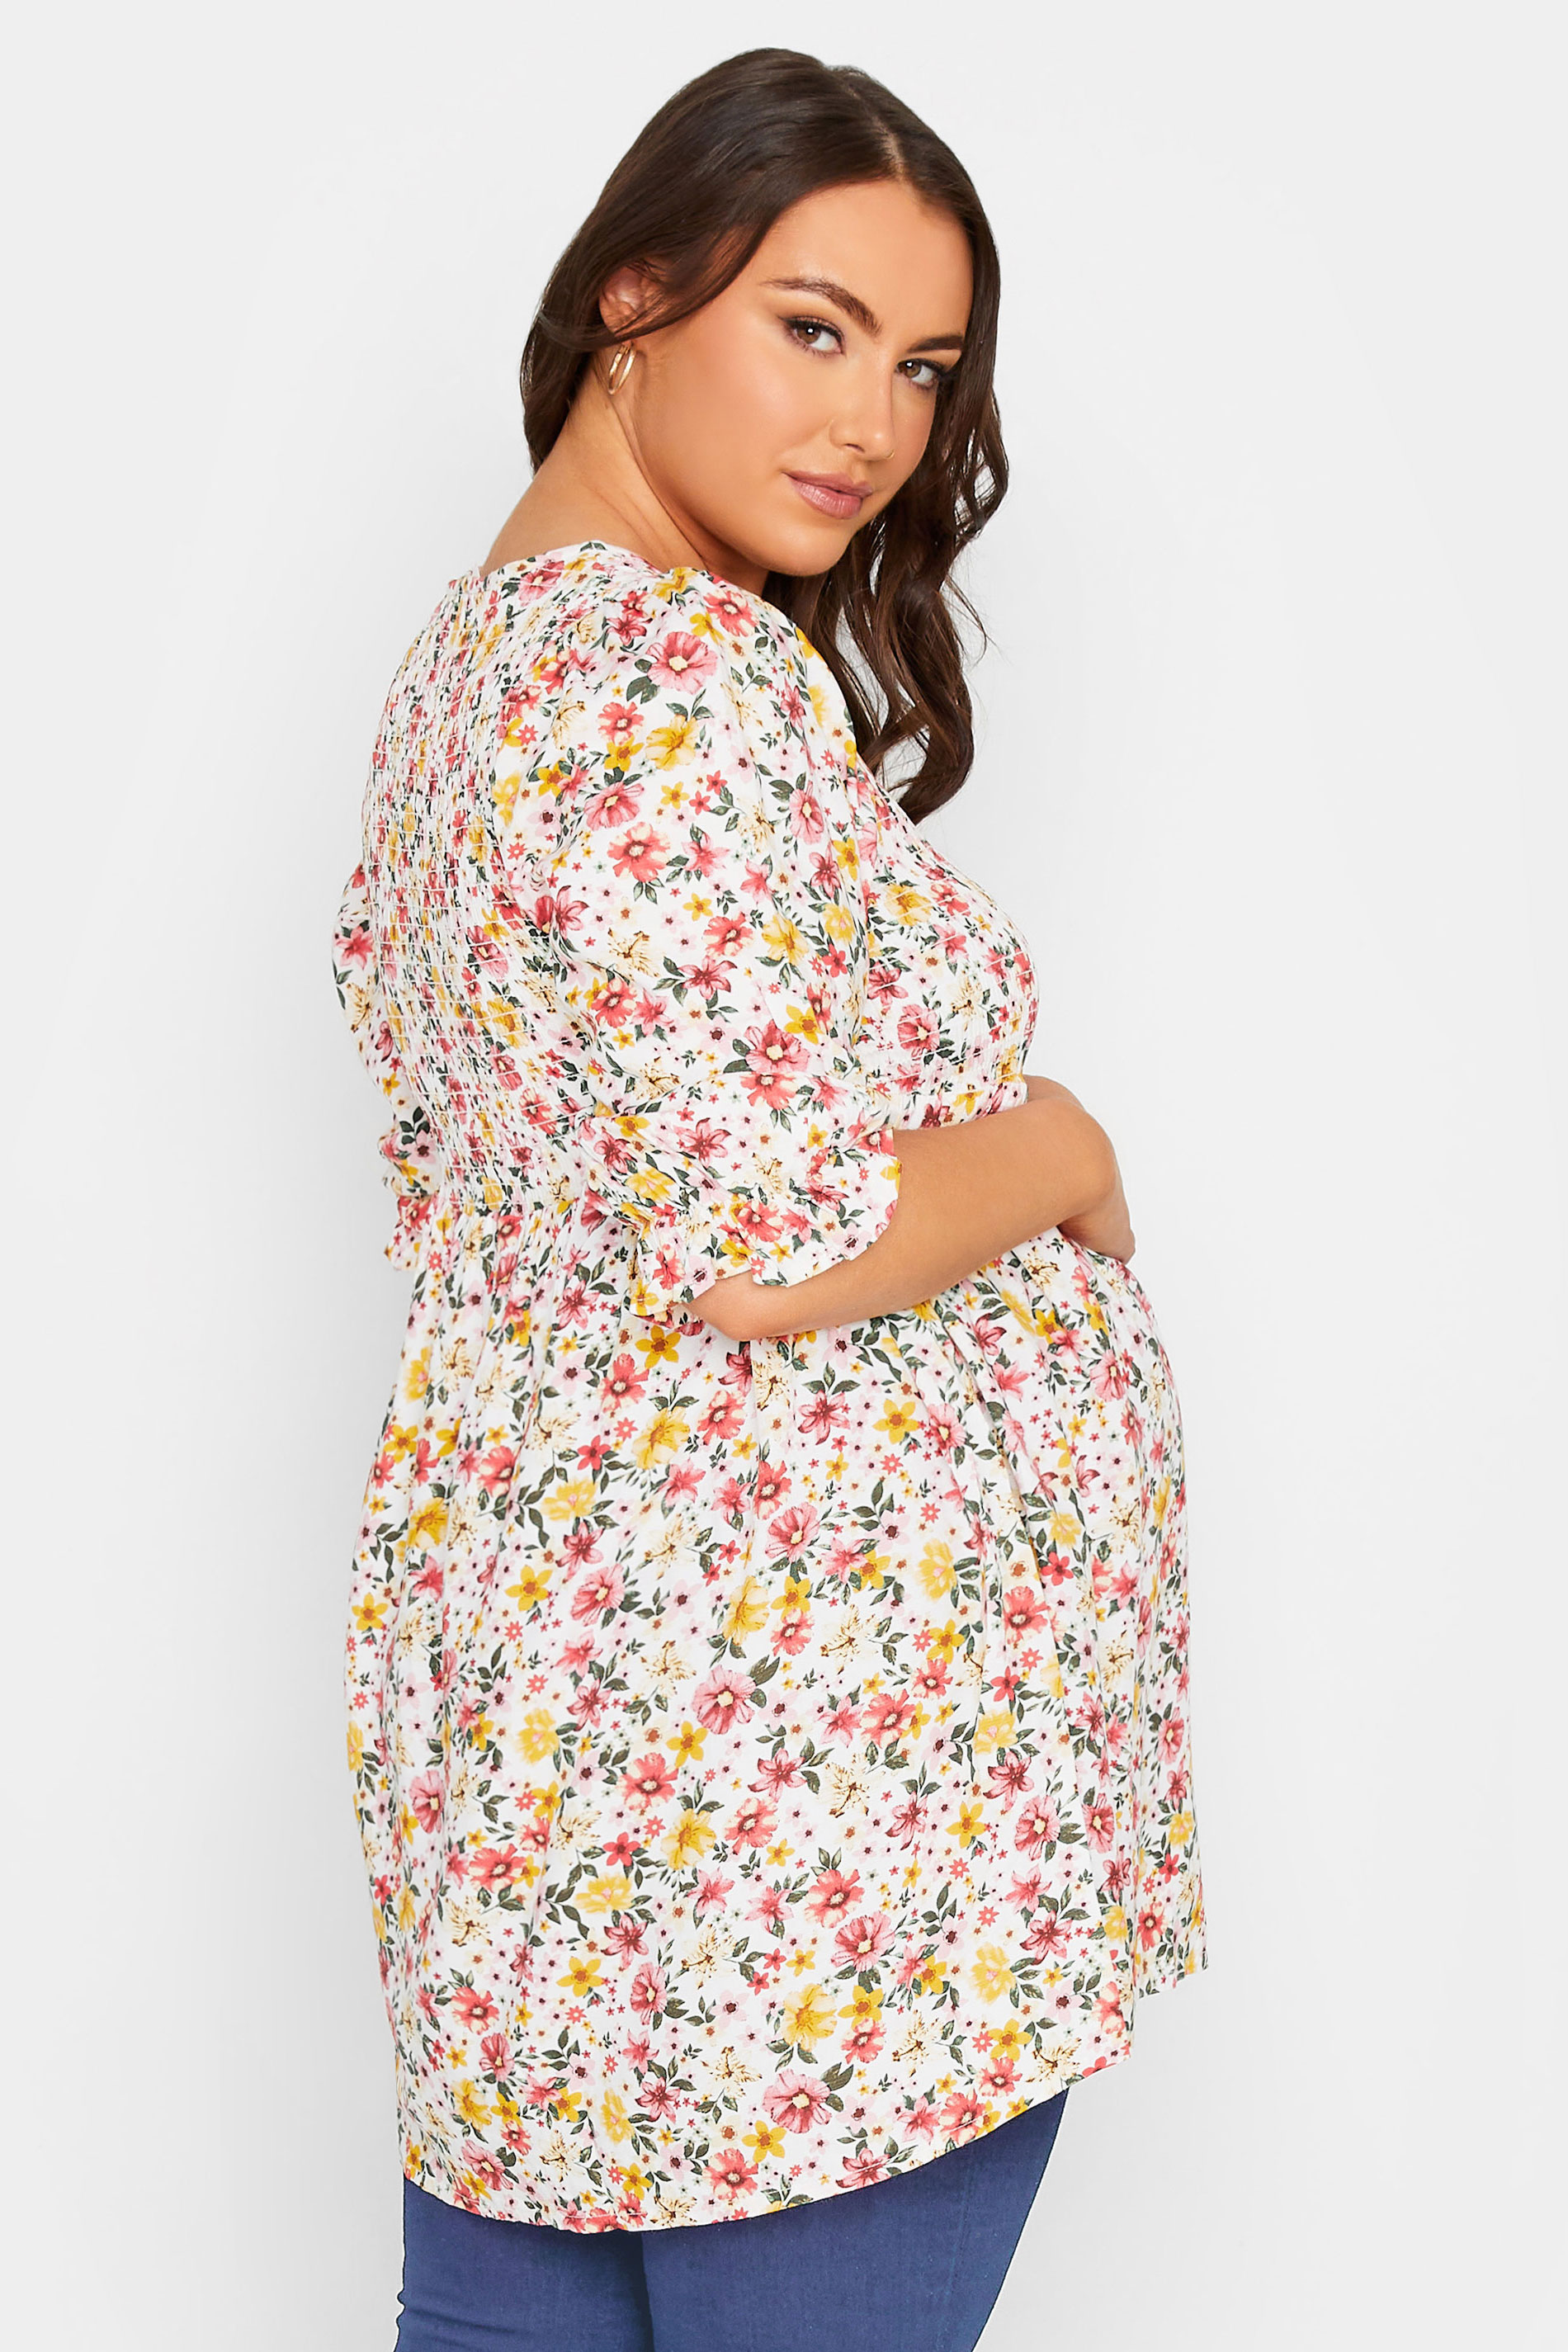 BUMP IT UP MATERNITY Plus Size White Floral Shirred Top | Yours Clothing 3